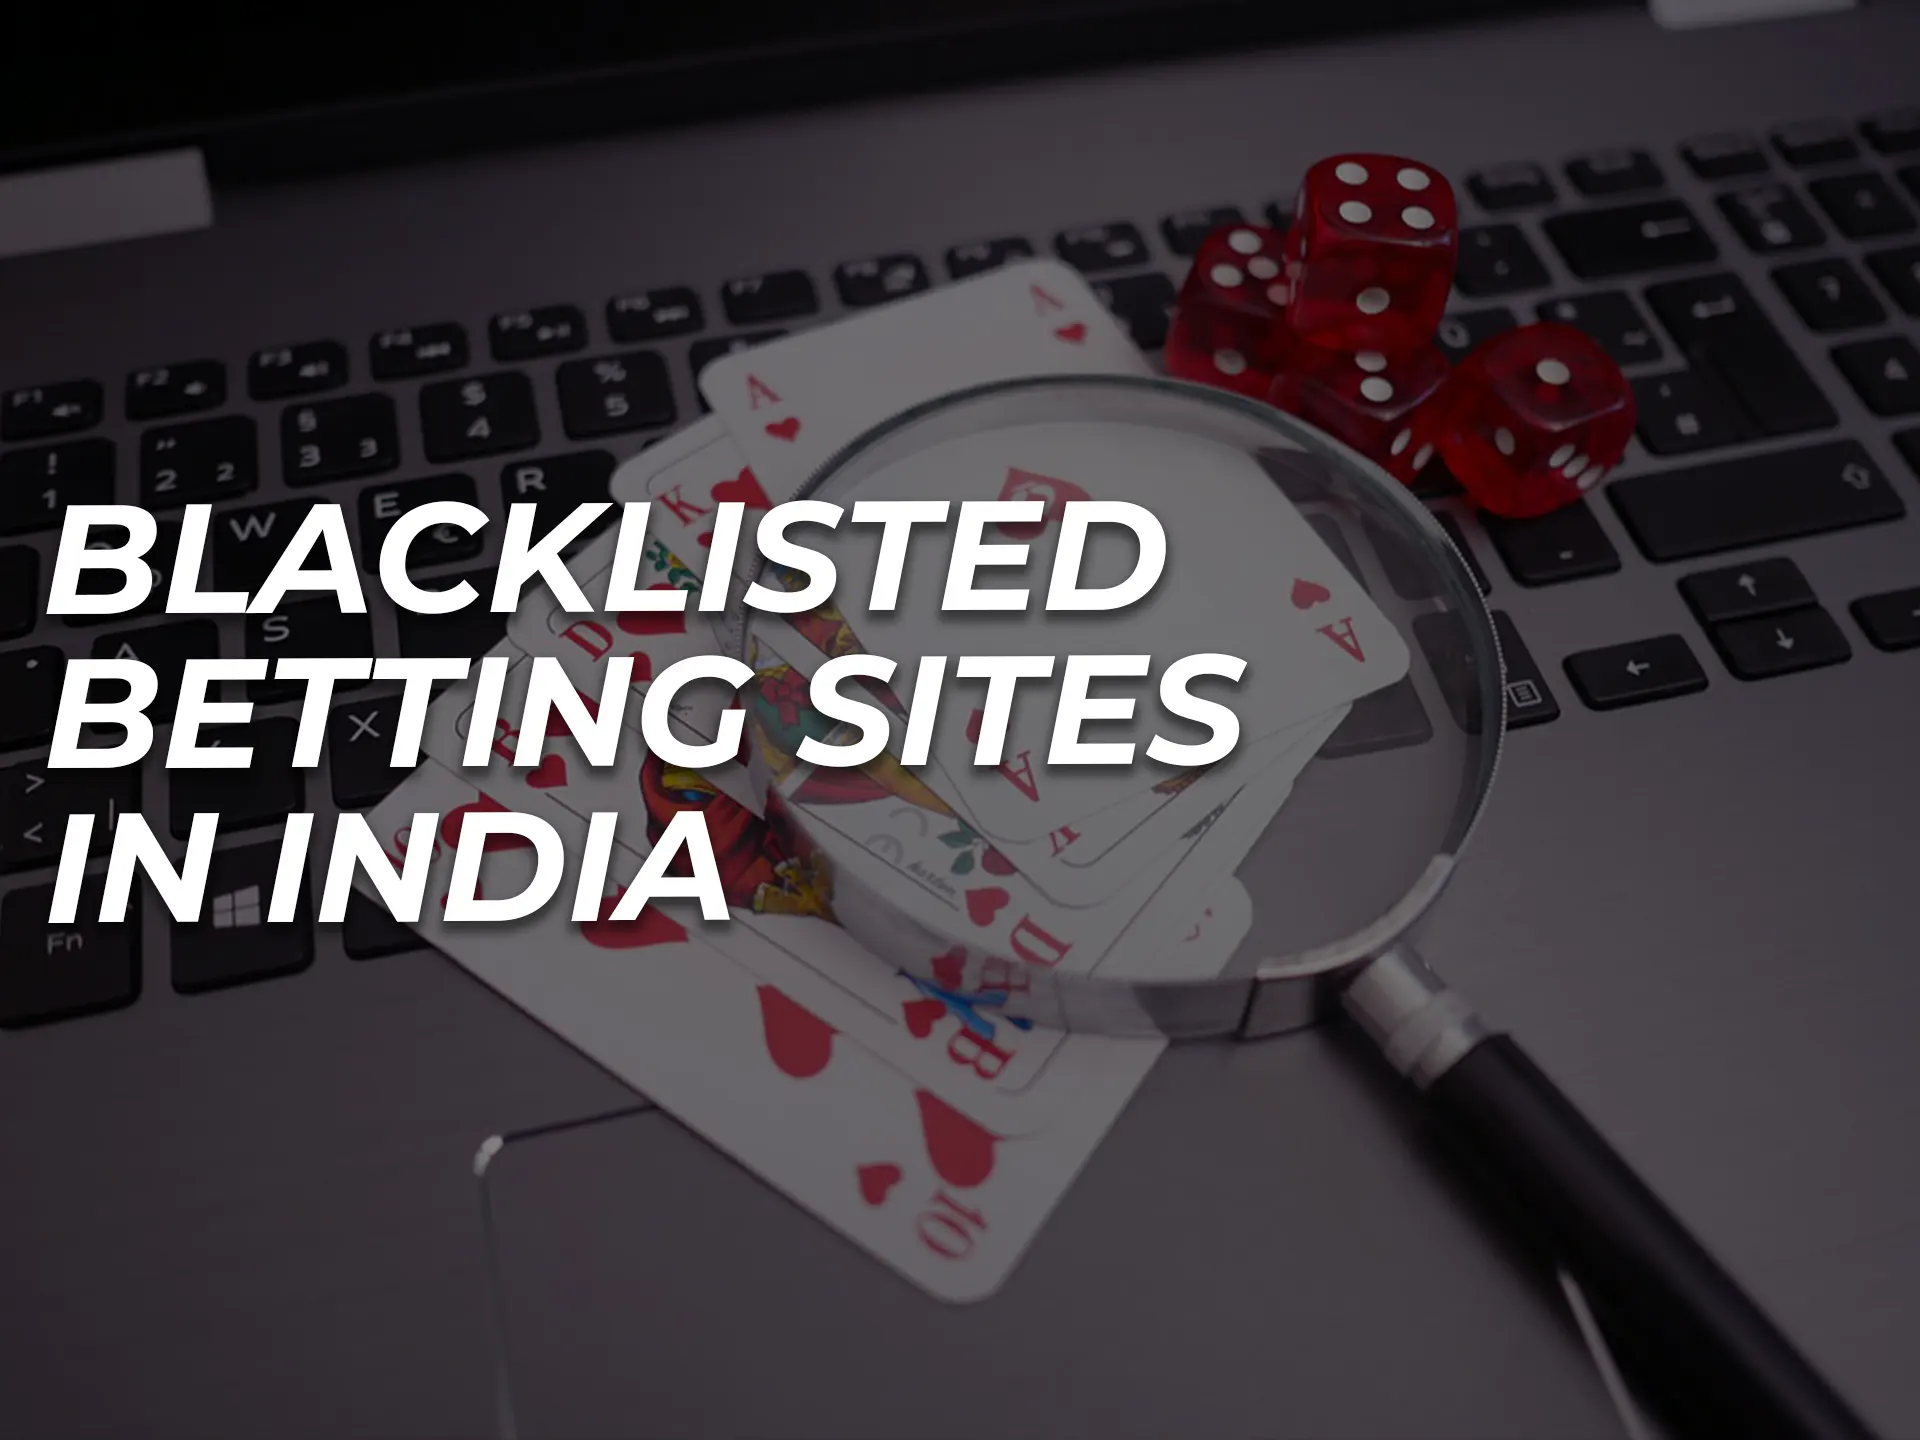 We recommend players to avoid blacklisted sites to protect themselves and their data.